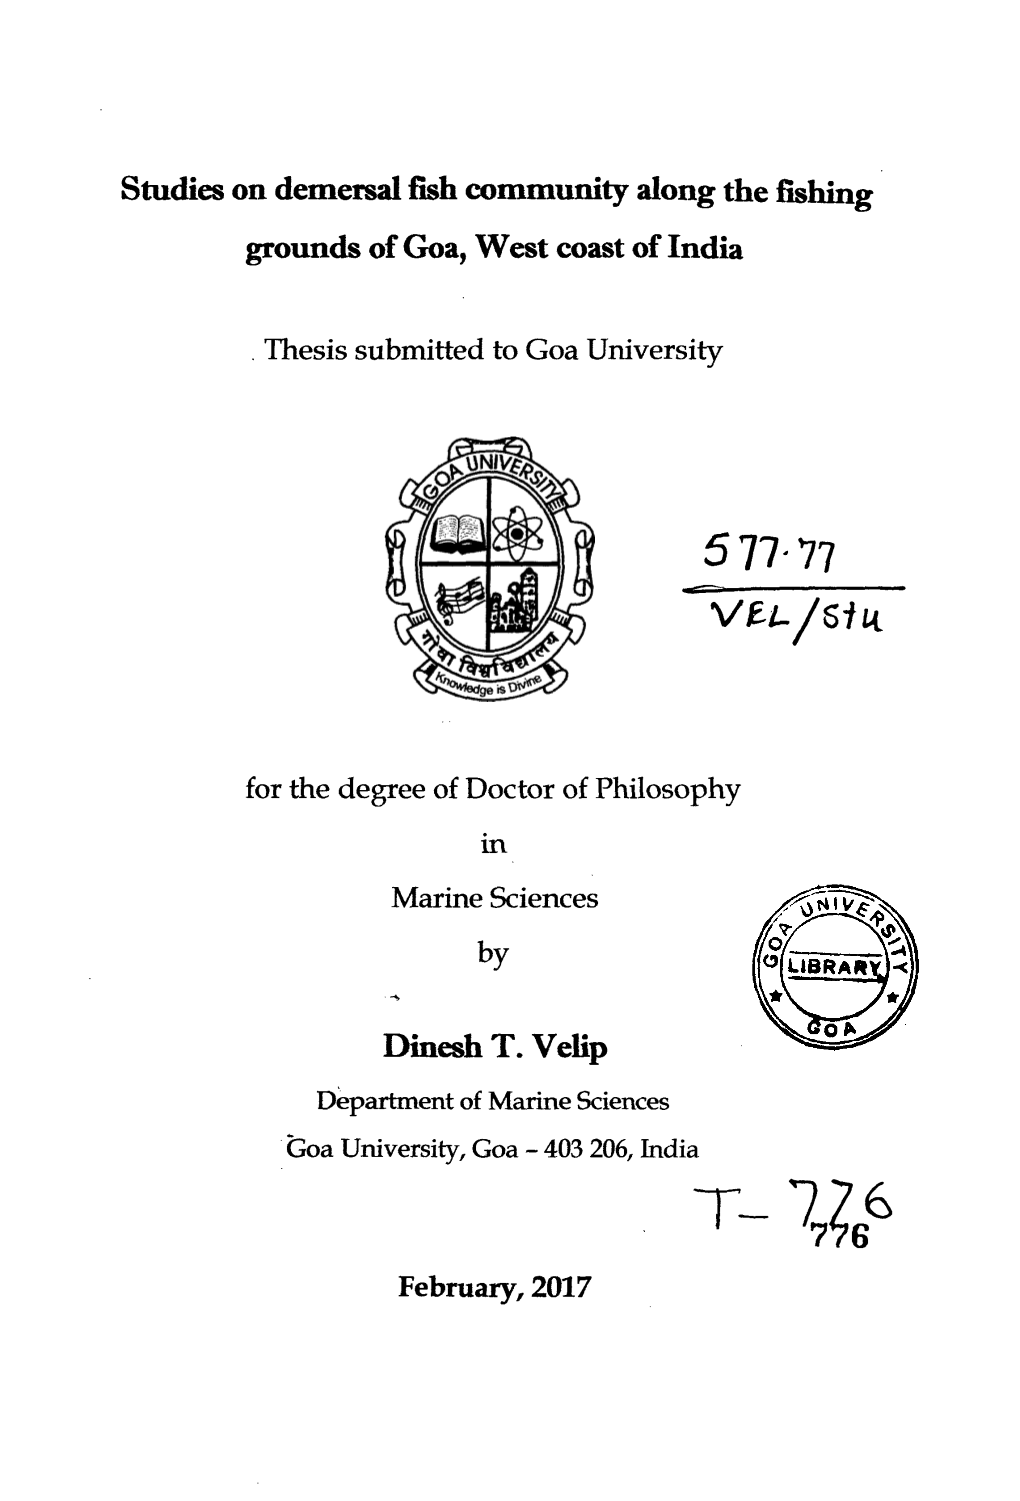 Thesis Submitted to Goa University